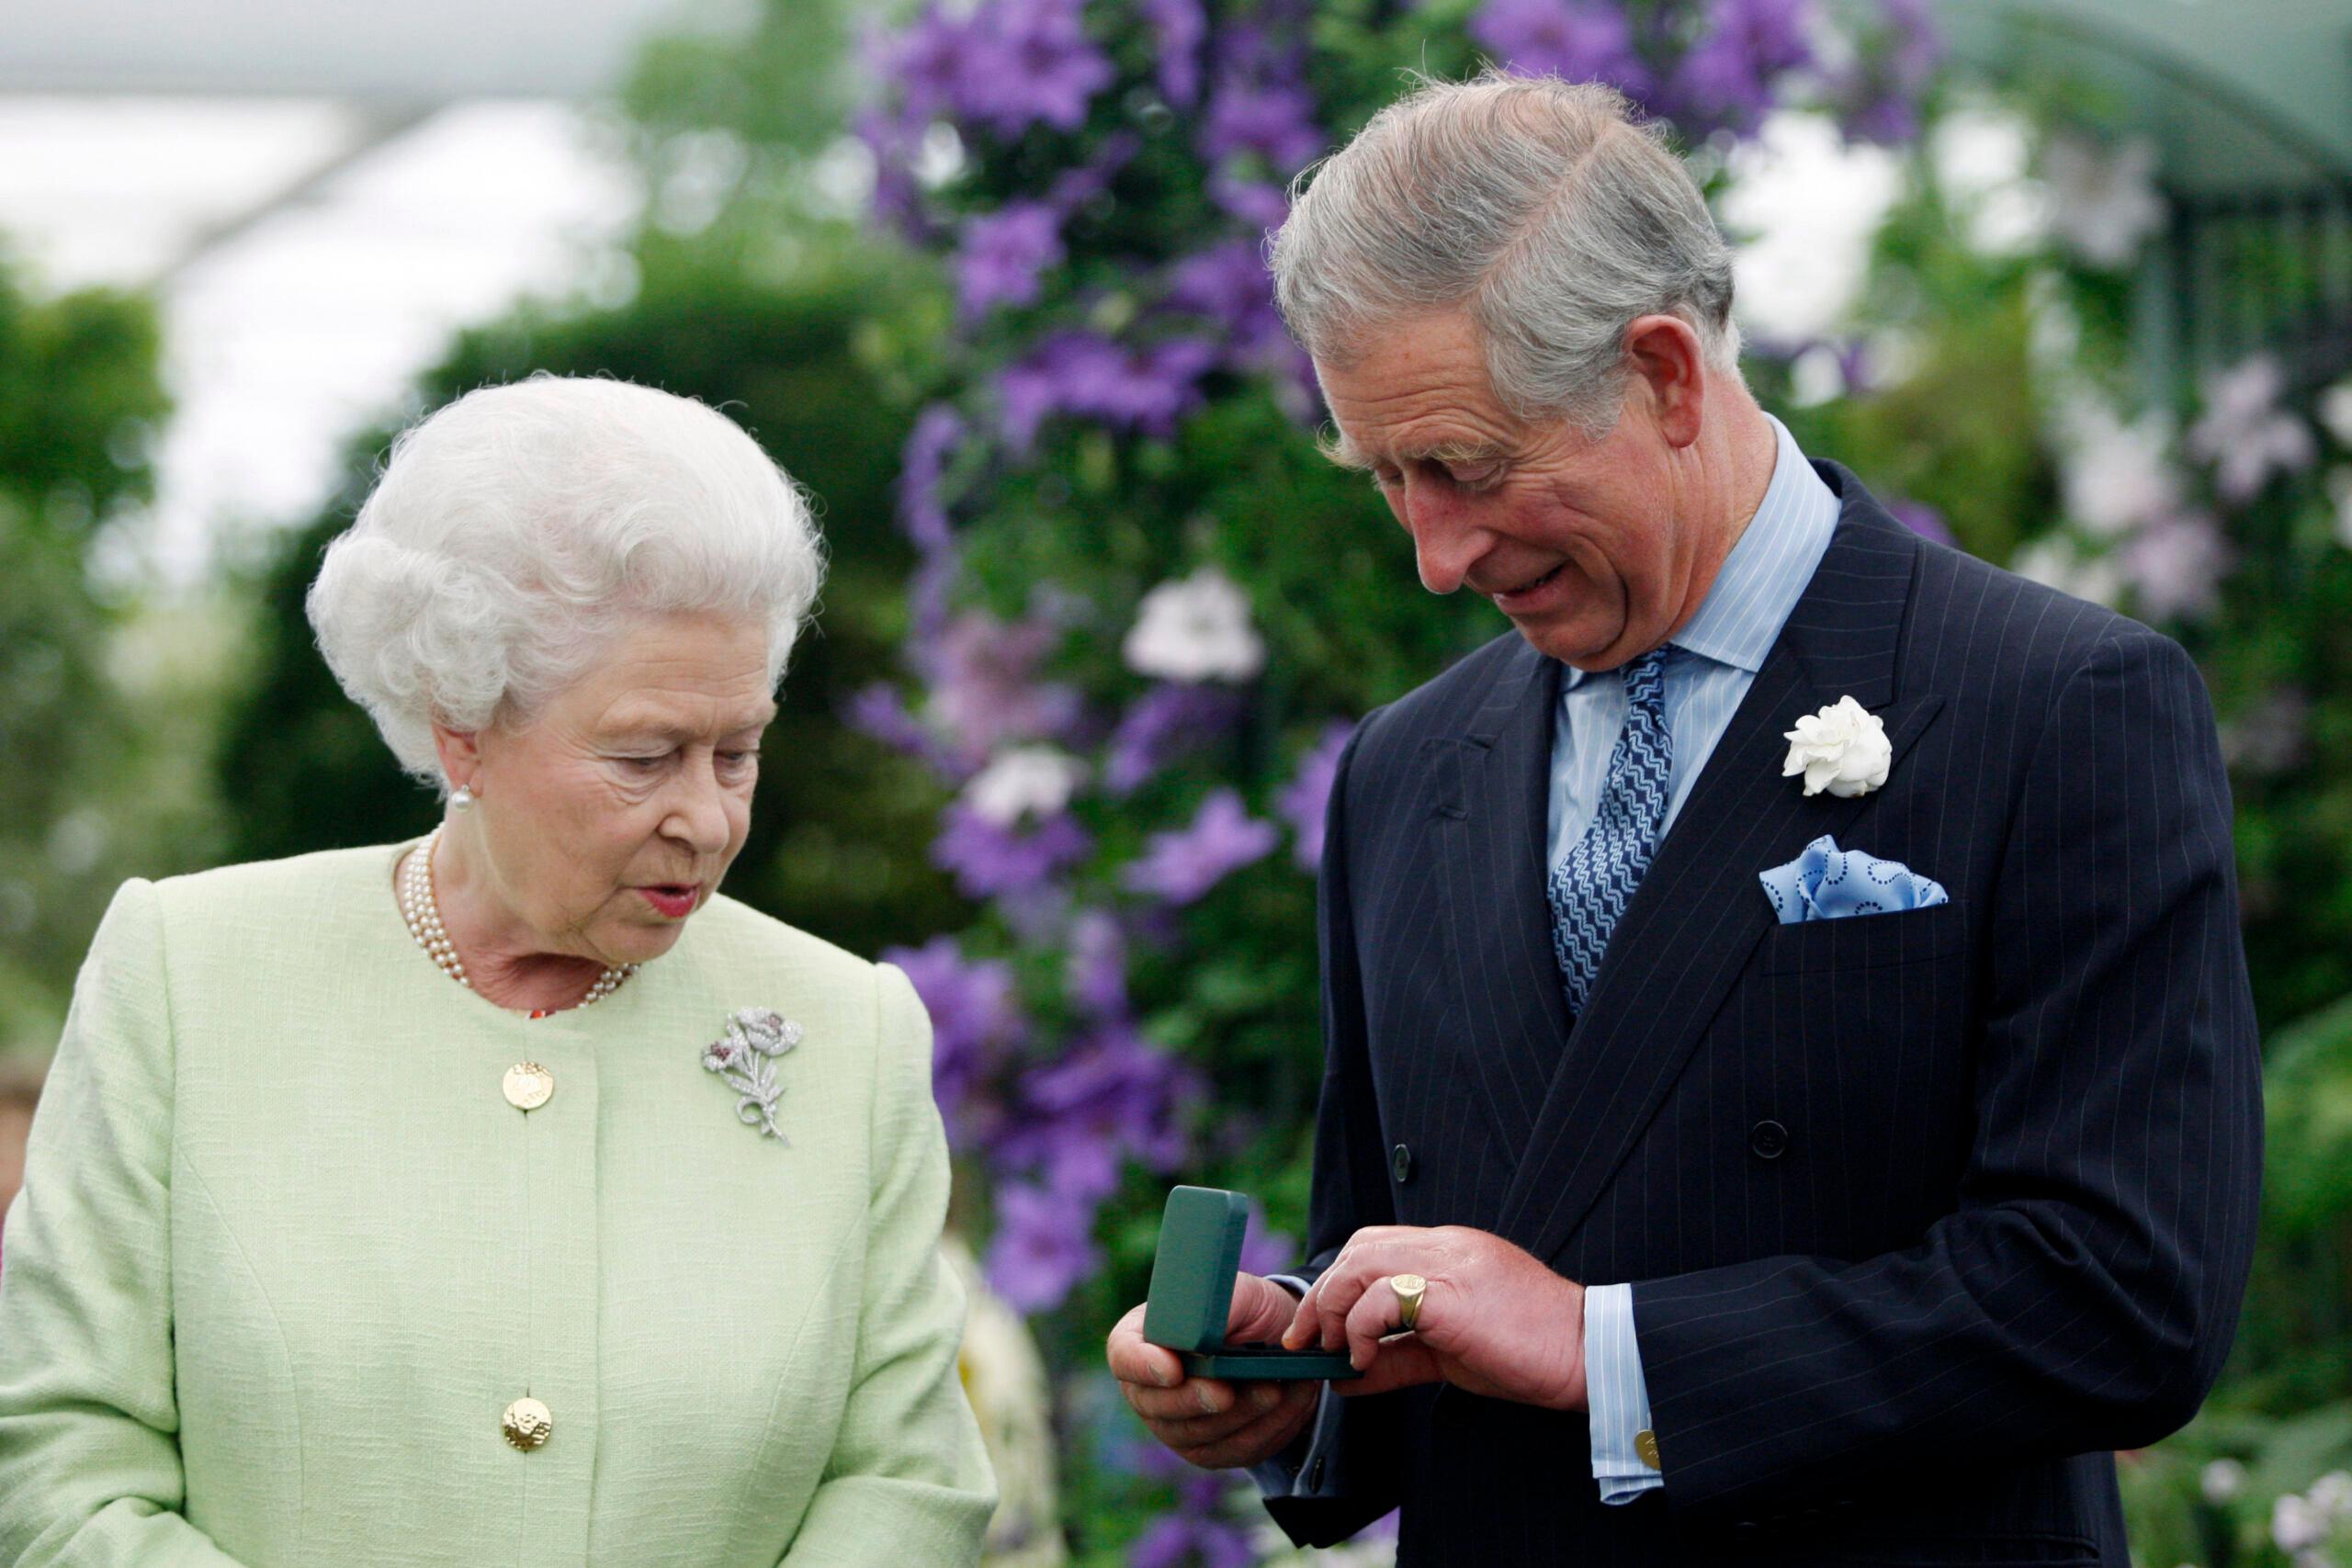 Britain Queen Elizabeth II presents to Prince Charles with a Royal Horticultural Society's Victoria Medal of Honour during a visit to Chelsea Flower Show in London, on May 18, 2009. The Victoria Medal of Honour is the highest accolade that the Royal Horticultural Society can bestow.    AFP    PHOTO  ROTA  POOL/SANG TAN (Photo by SANG TAN / POOL / AFP)